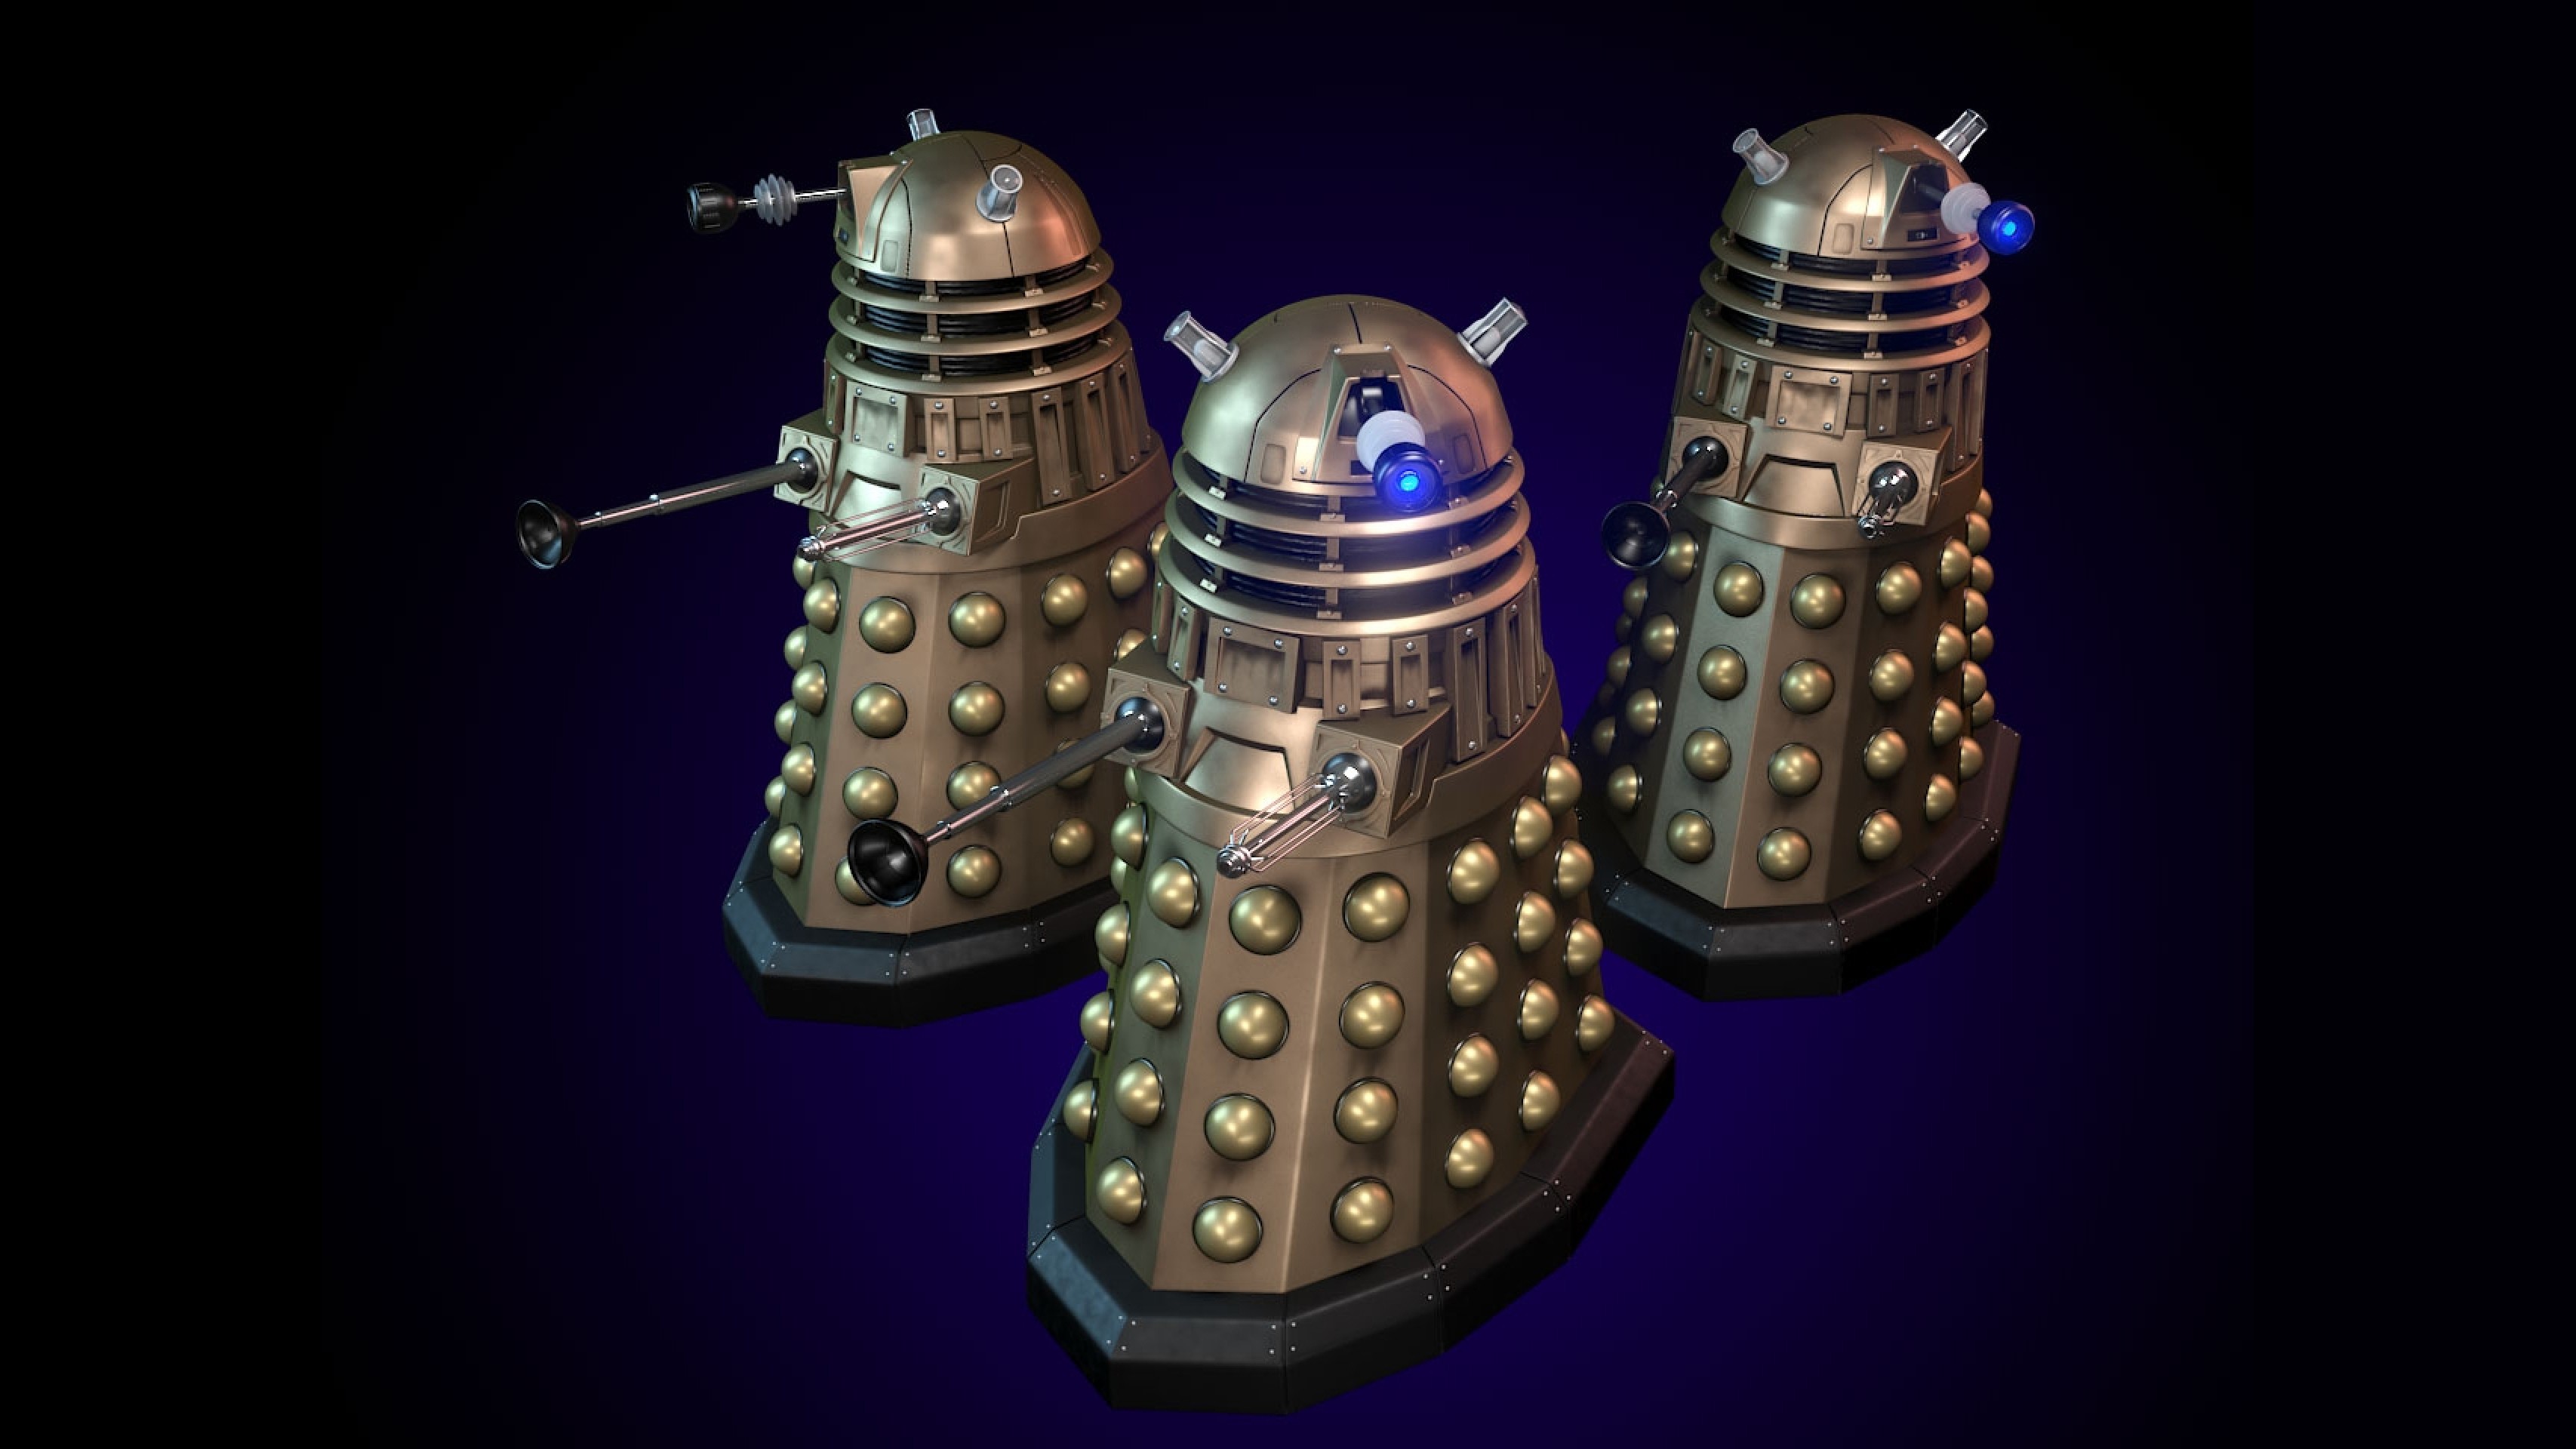 General 3413x1920 Doctor Who Daleks science fiction TV series villains